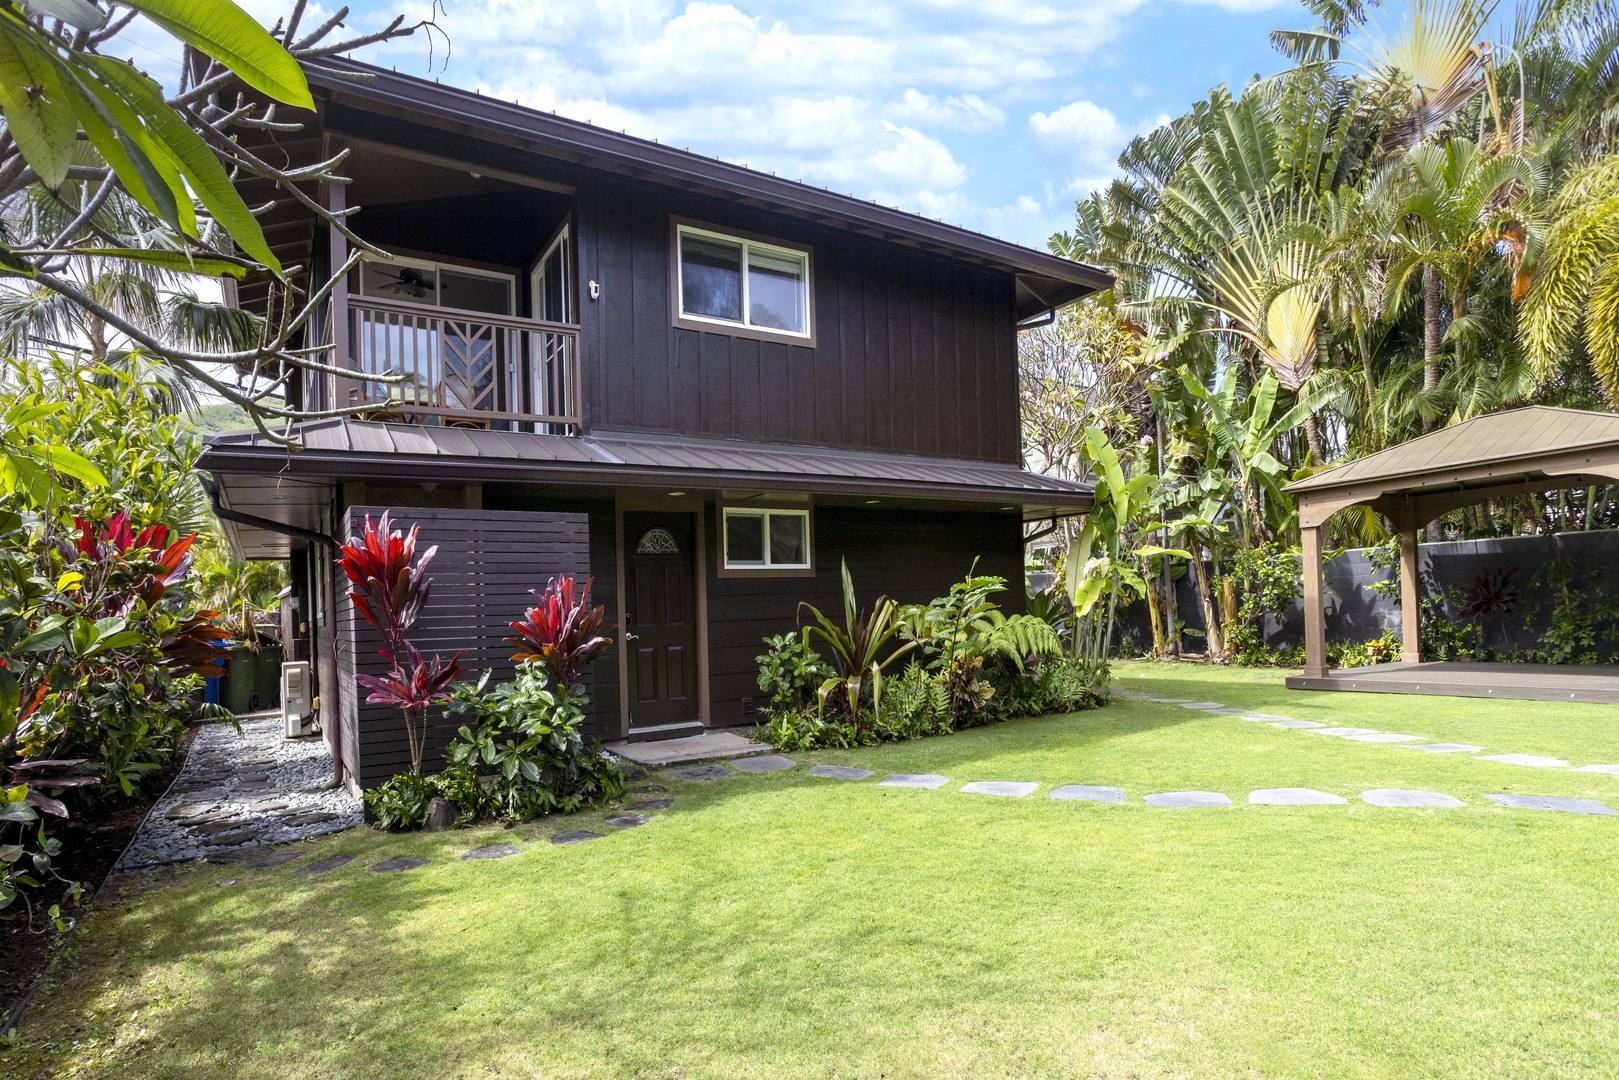 Kailua Vacation Rentals, Mokulua Seaside - Two story vacation home, perfect for large family groups